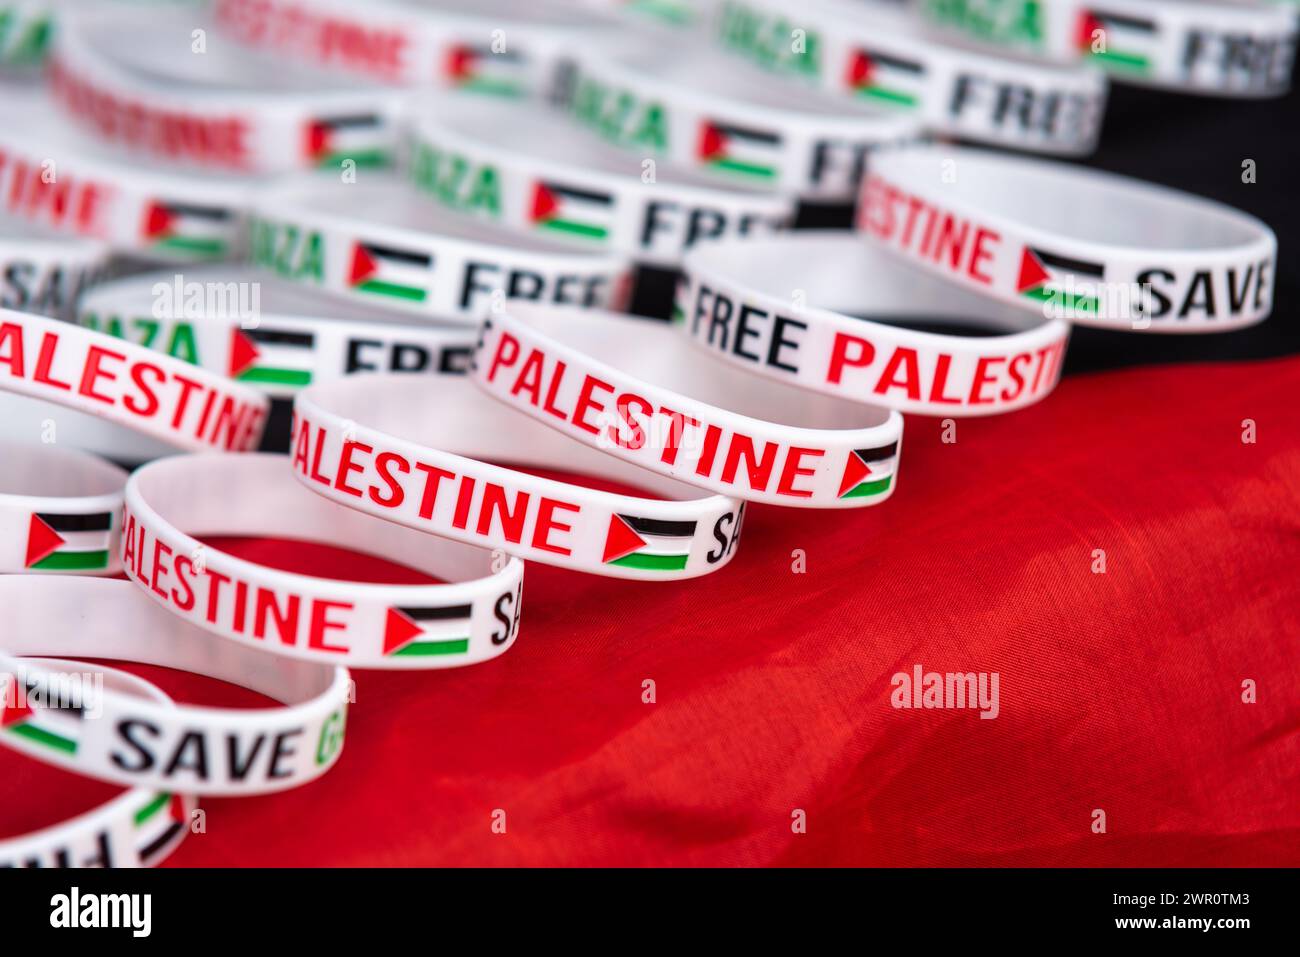 Wristbands for Pro Palestine protest march in London, UK, protesting against the conflict in Gaza and against Israel occupation and military actions. Stock Photo